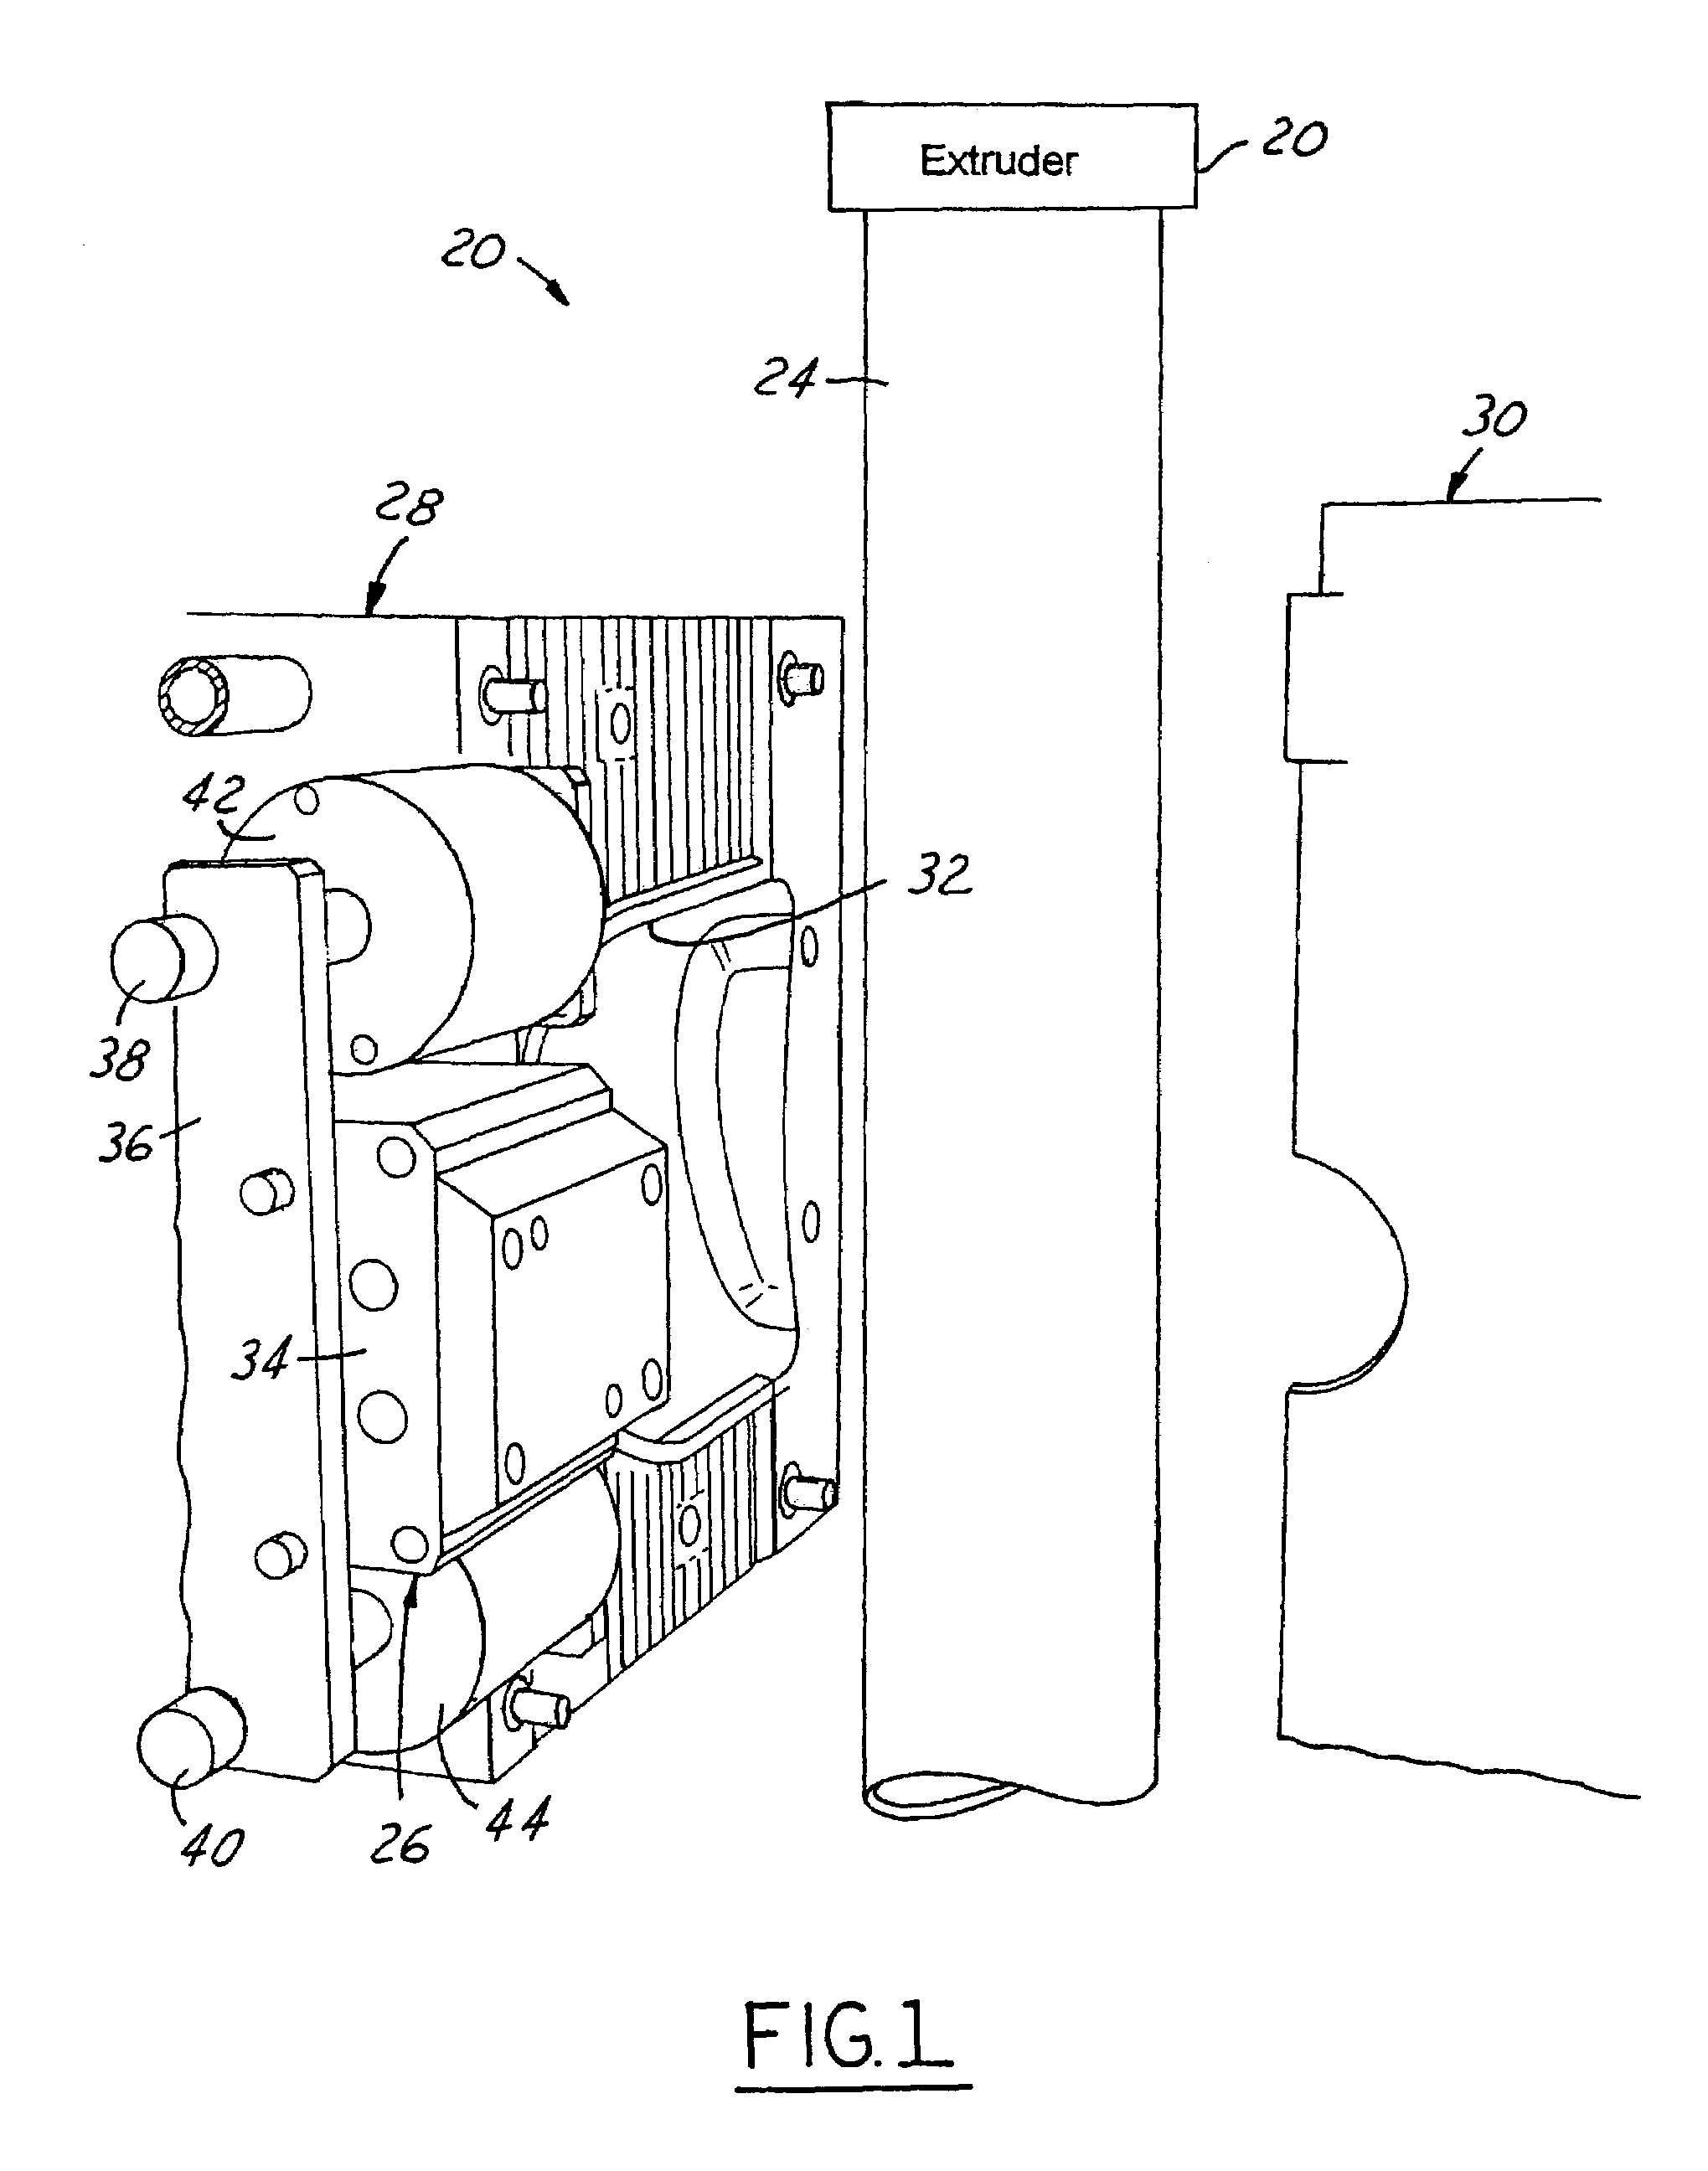 Method and apparatus for blow molding hollow plastic containers